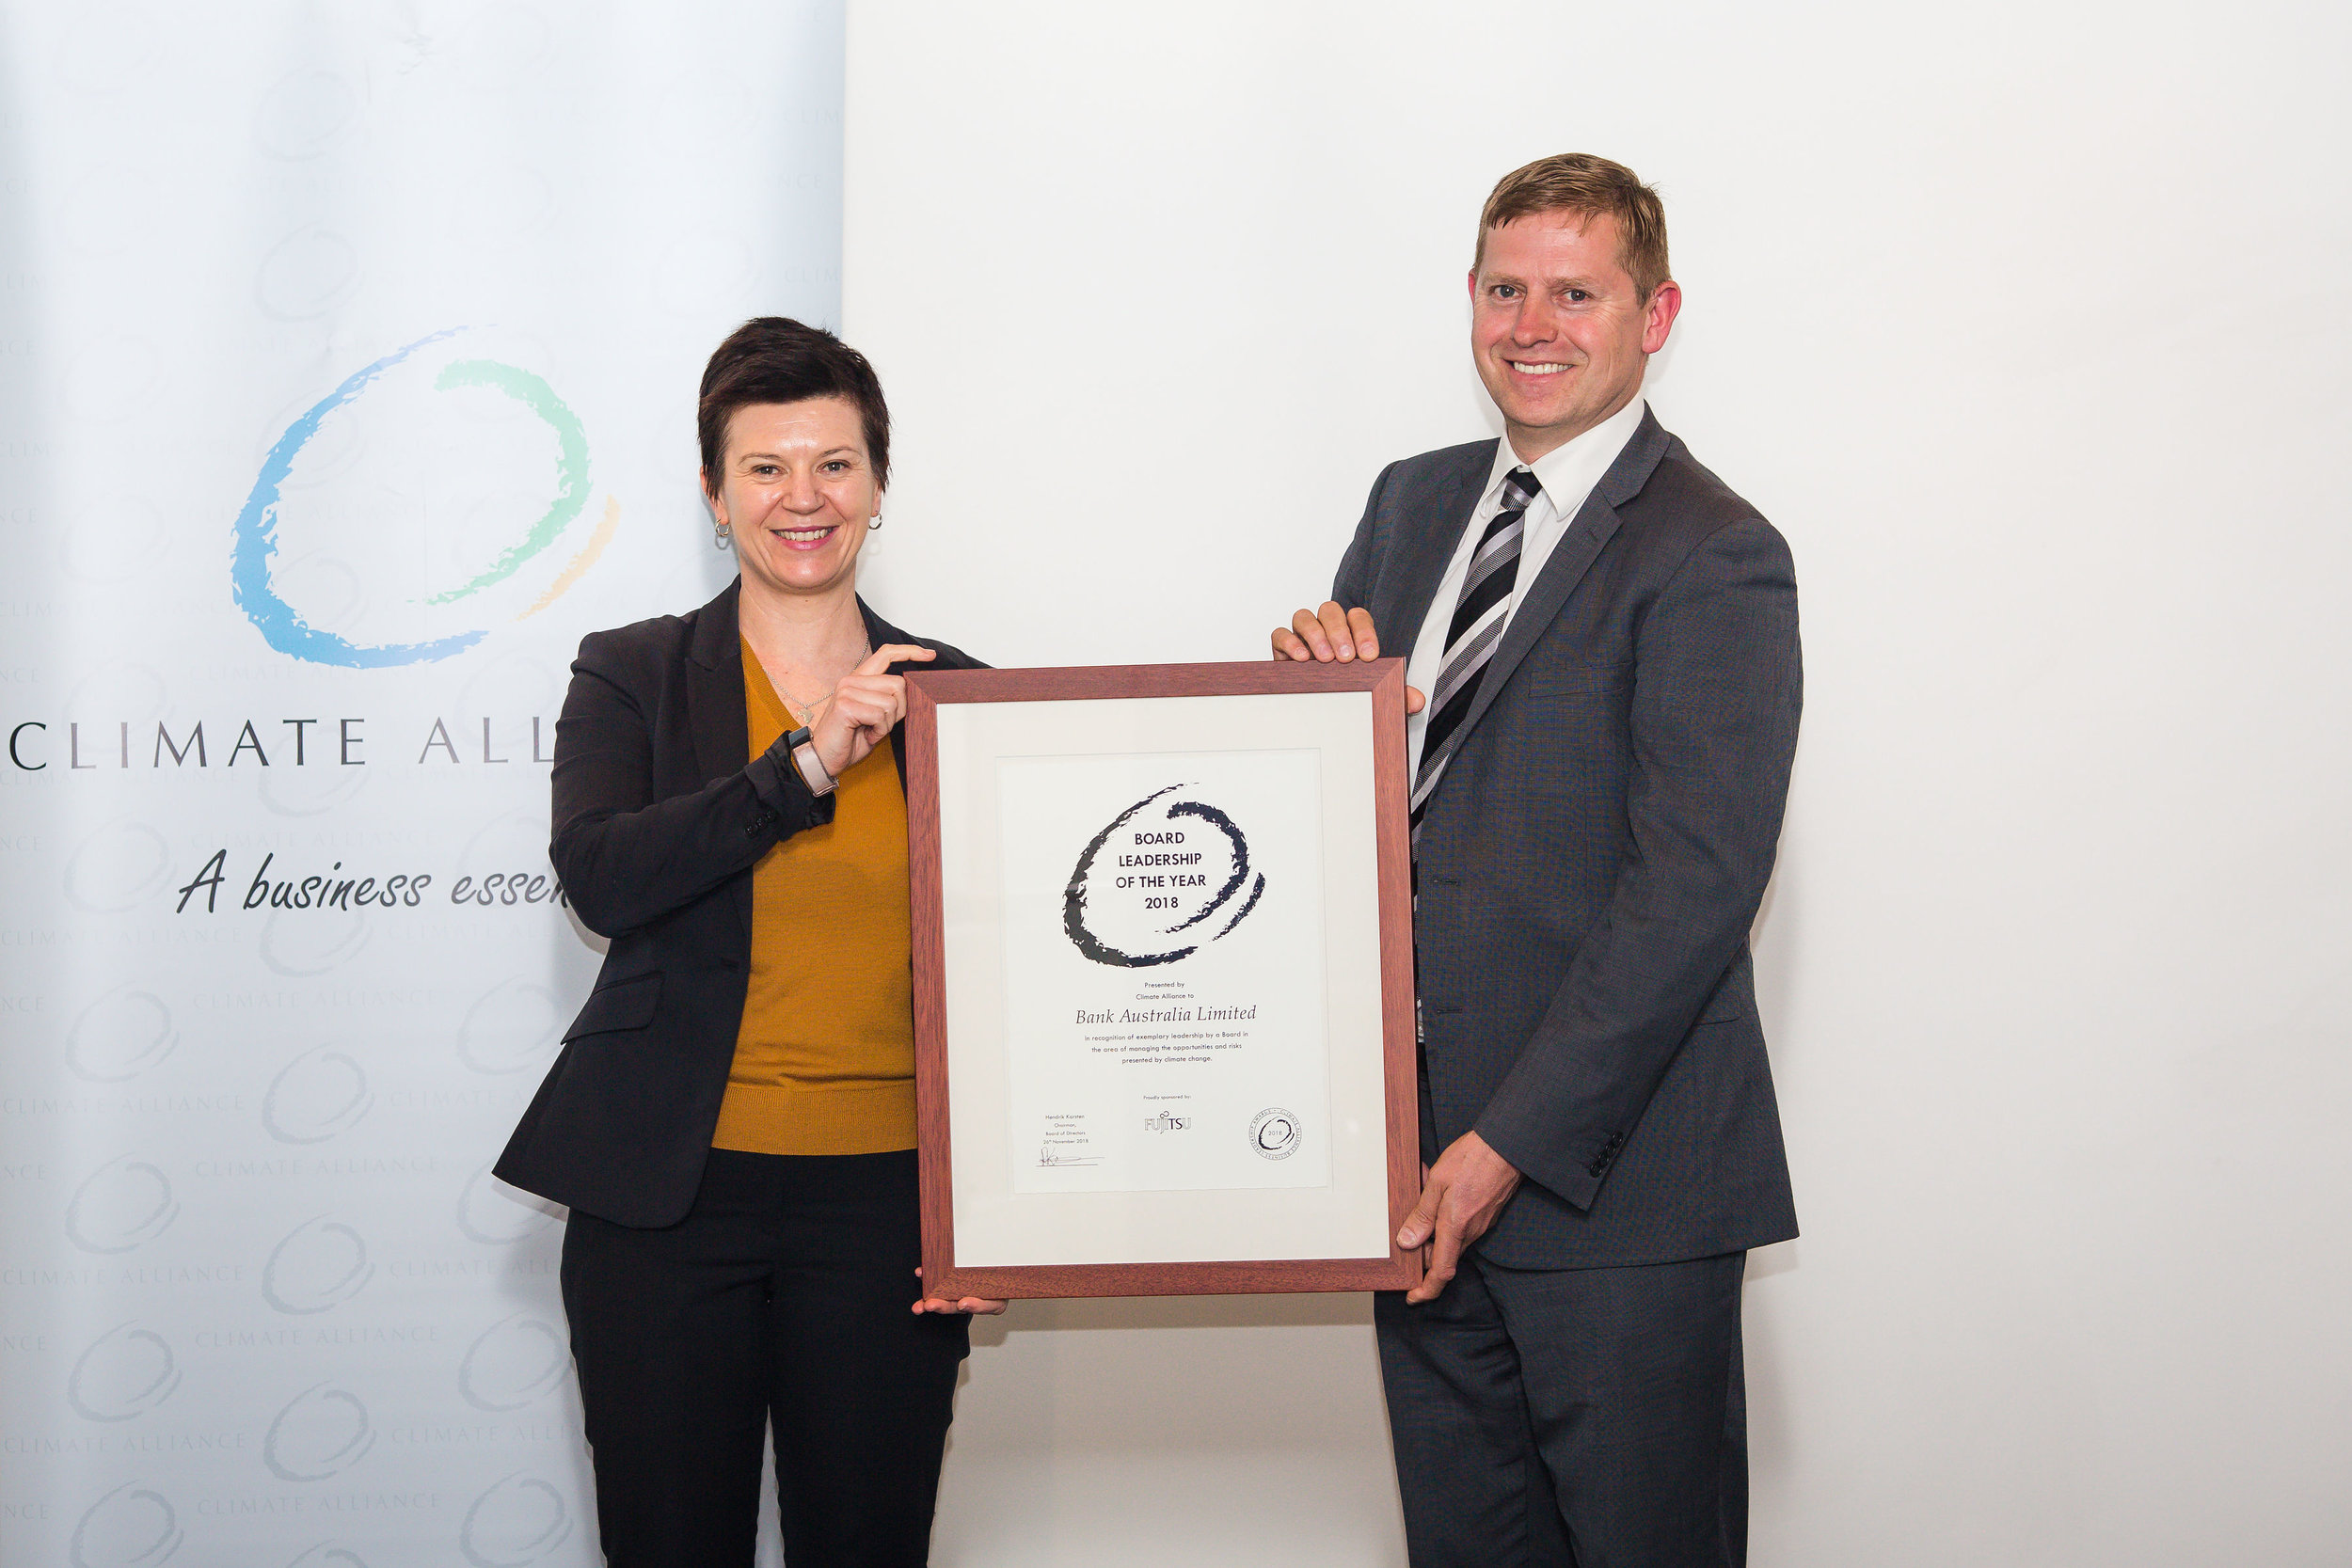  Board Leadership of the Year 2018 - Bank Australia, represented by Fiona Nixon, Head of Corporate Affairs with Turlough Guerin, Chairman of the Climate Alliance Board of Advisors. 